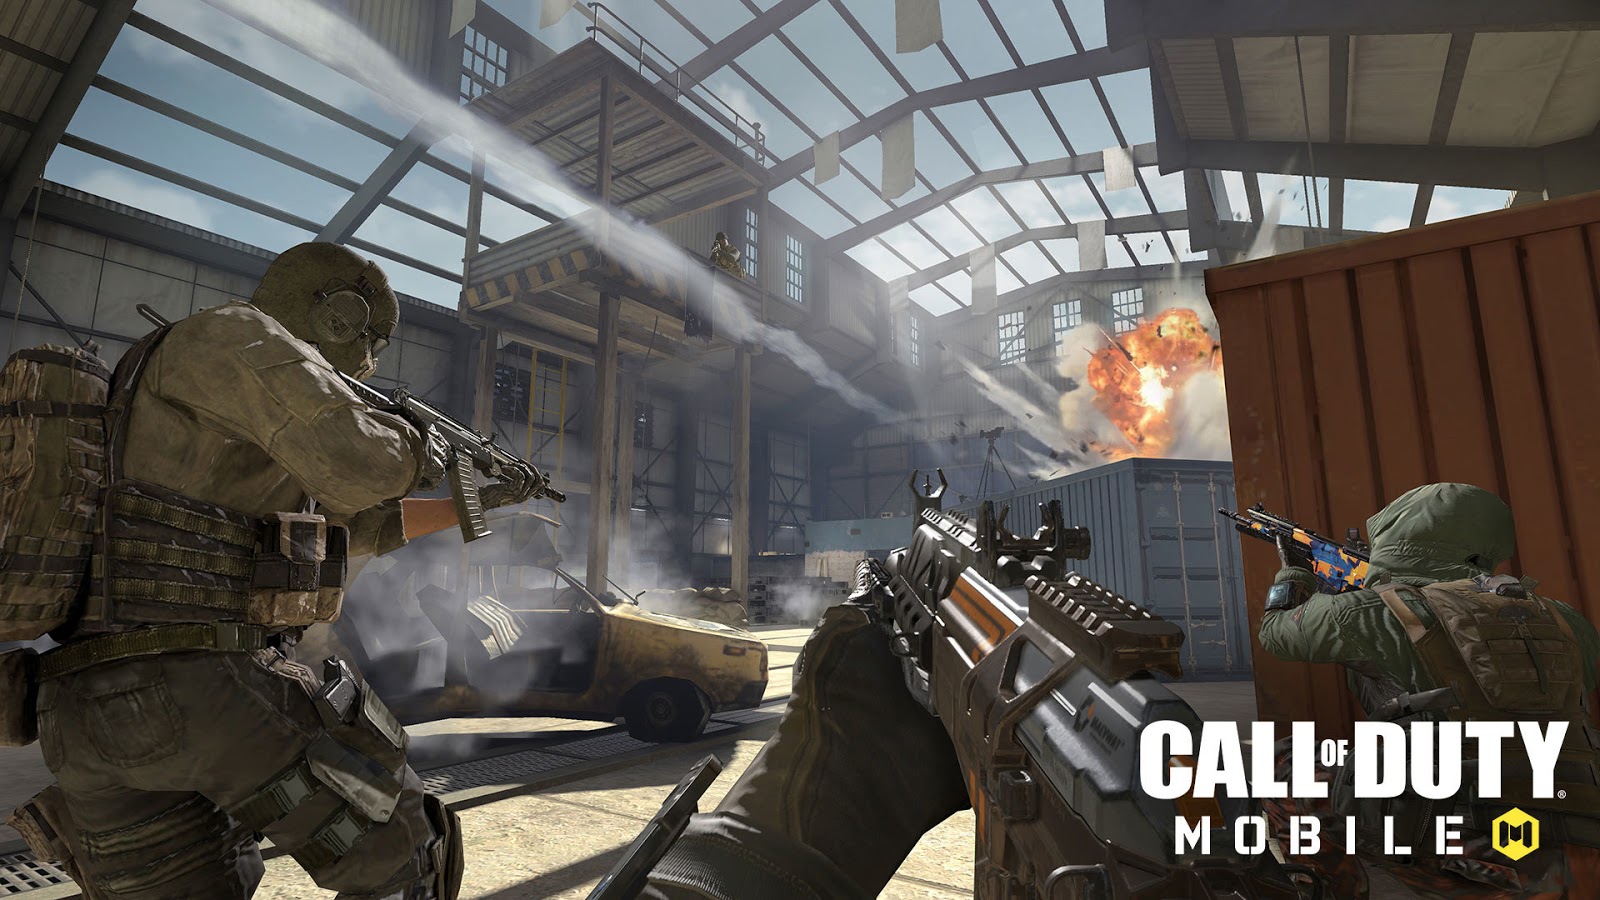 Call Of Duty Mobile APK + OBB Data Download - PK Techs - 